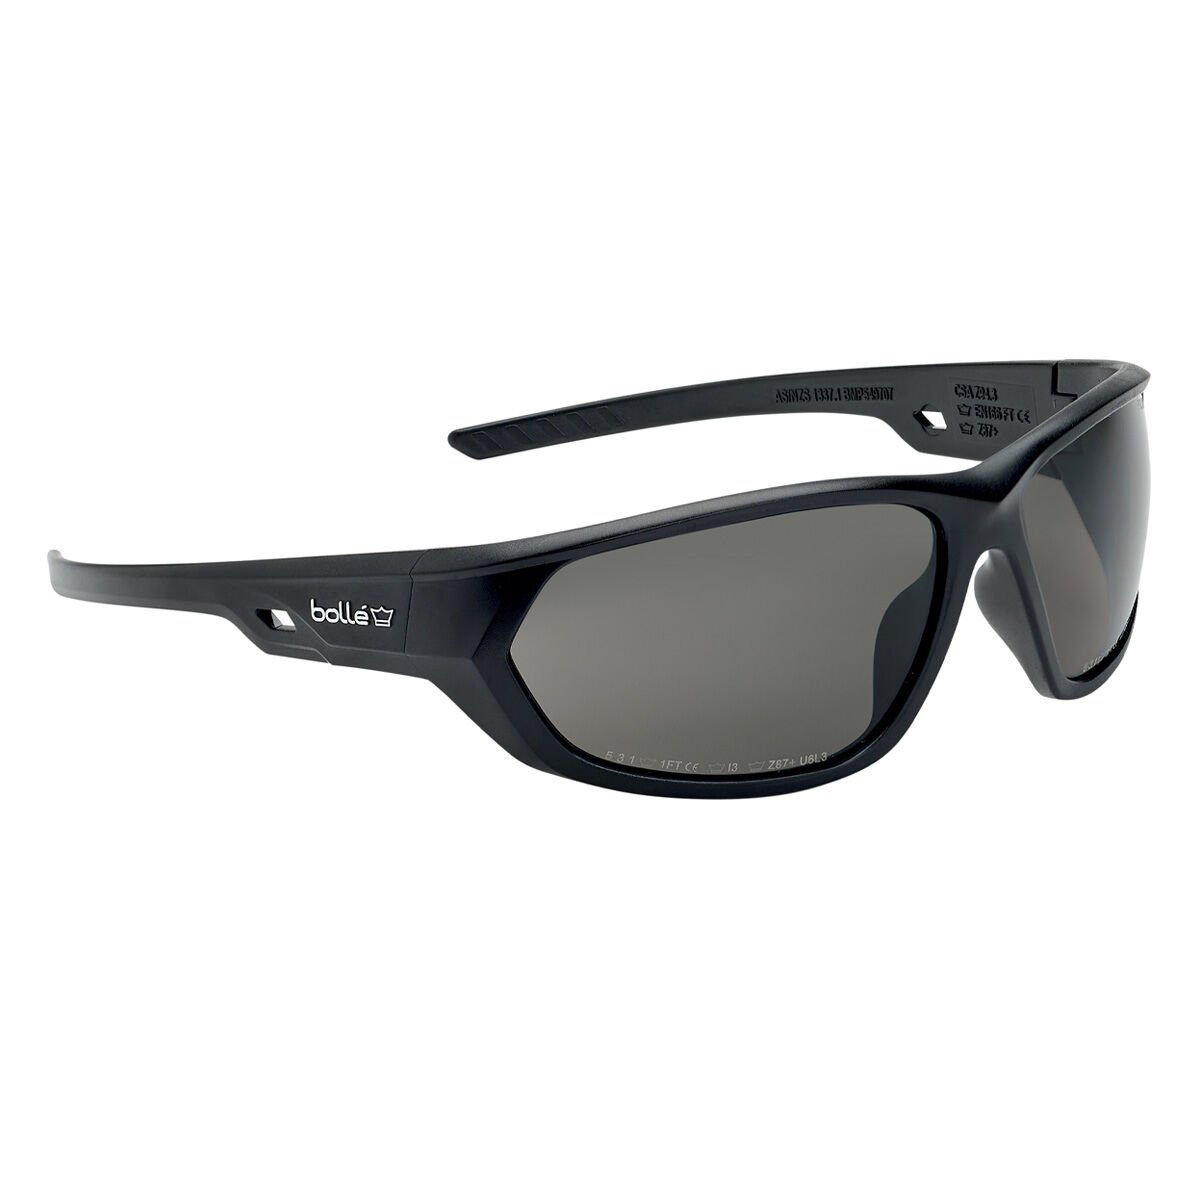 Bolle Safety 253-TR-40087 Tracker Safety Eyewear with Black/Gray Polycarbonate TPE Full Frame and Yellow Lens